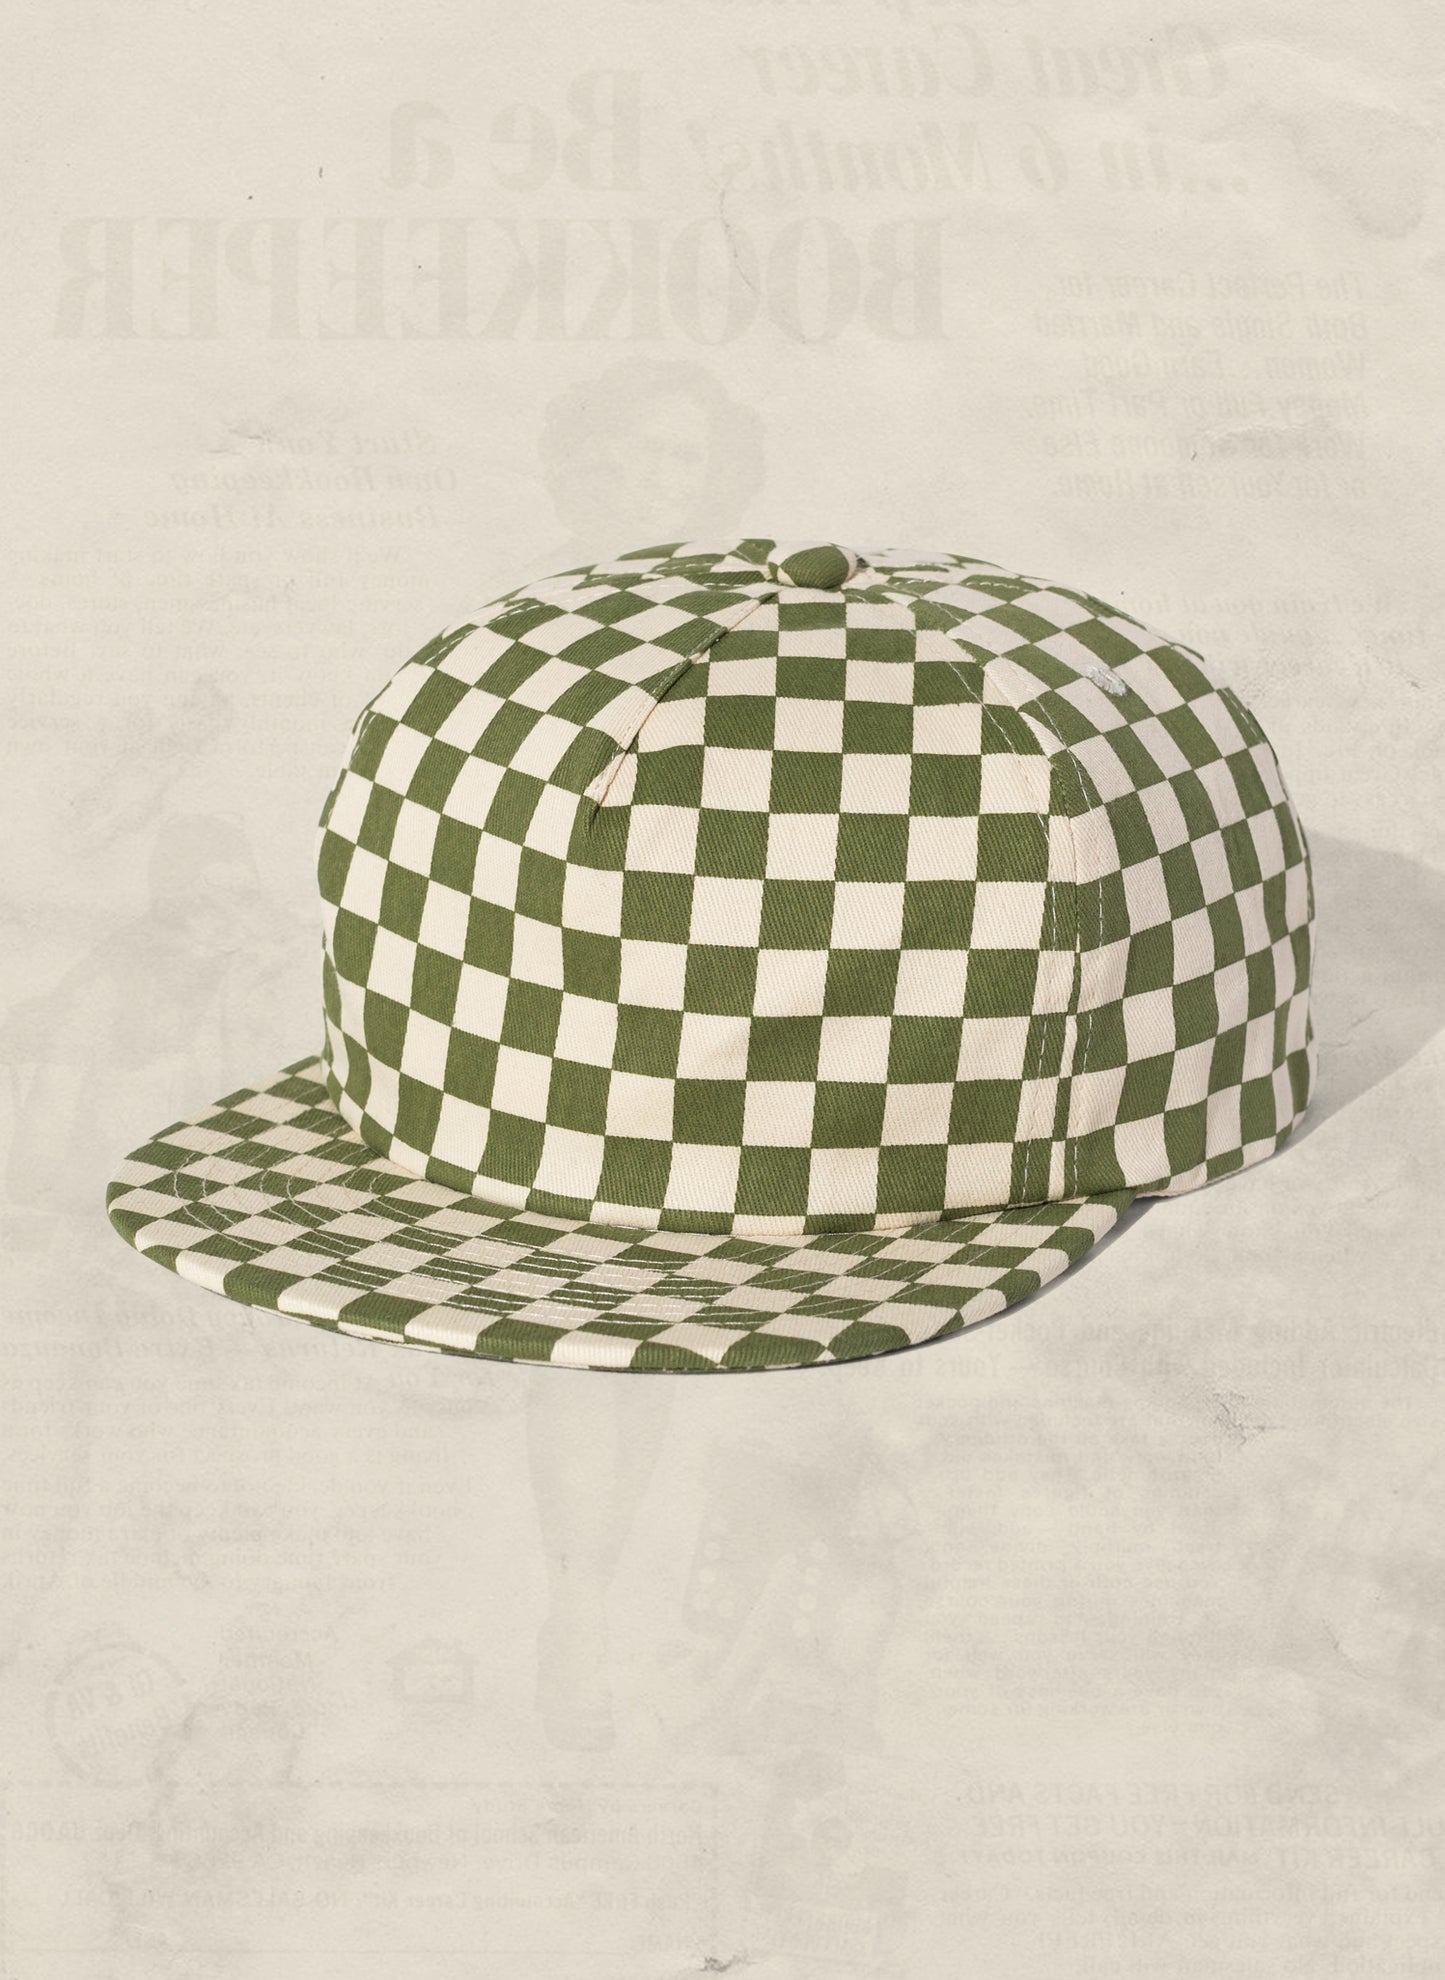 Weld Mfg Checkerboard Unstructured 5 Panel Hats - Vintage Inspired Hats - Laid Back Hats - Unique Earthy Color Hats